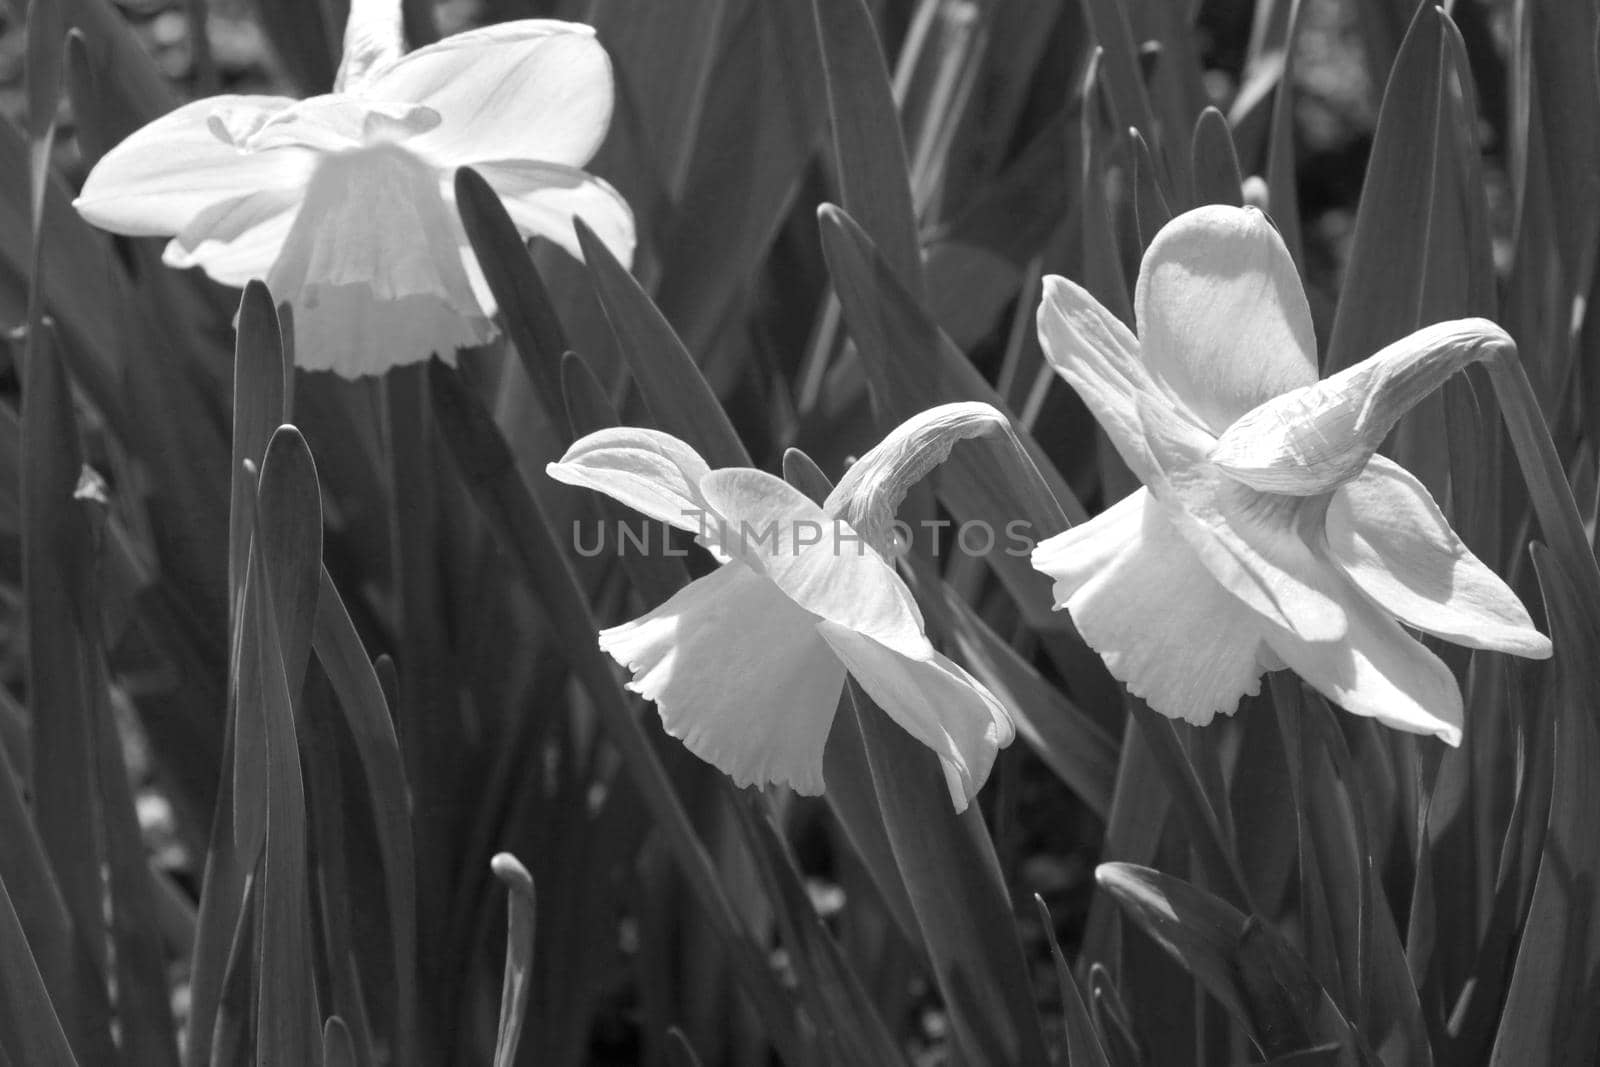 Black and white photo on a flower bed of flowering flowers. The background of nature